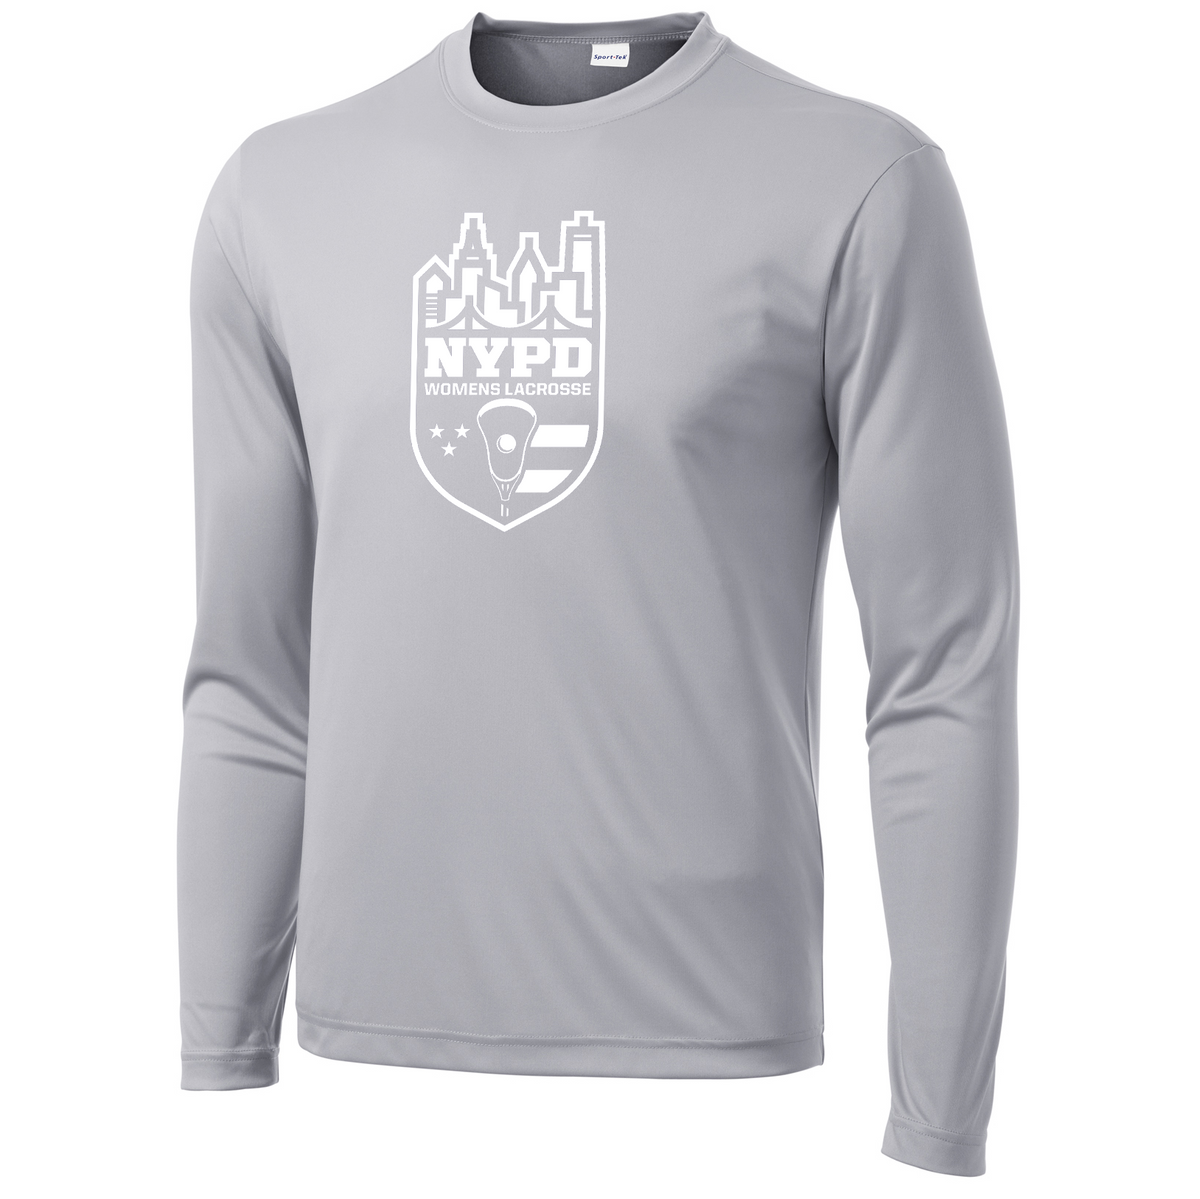 NYPD Womens Lacrosse Long Sleeve Performance Shirt